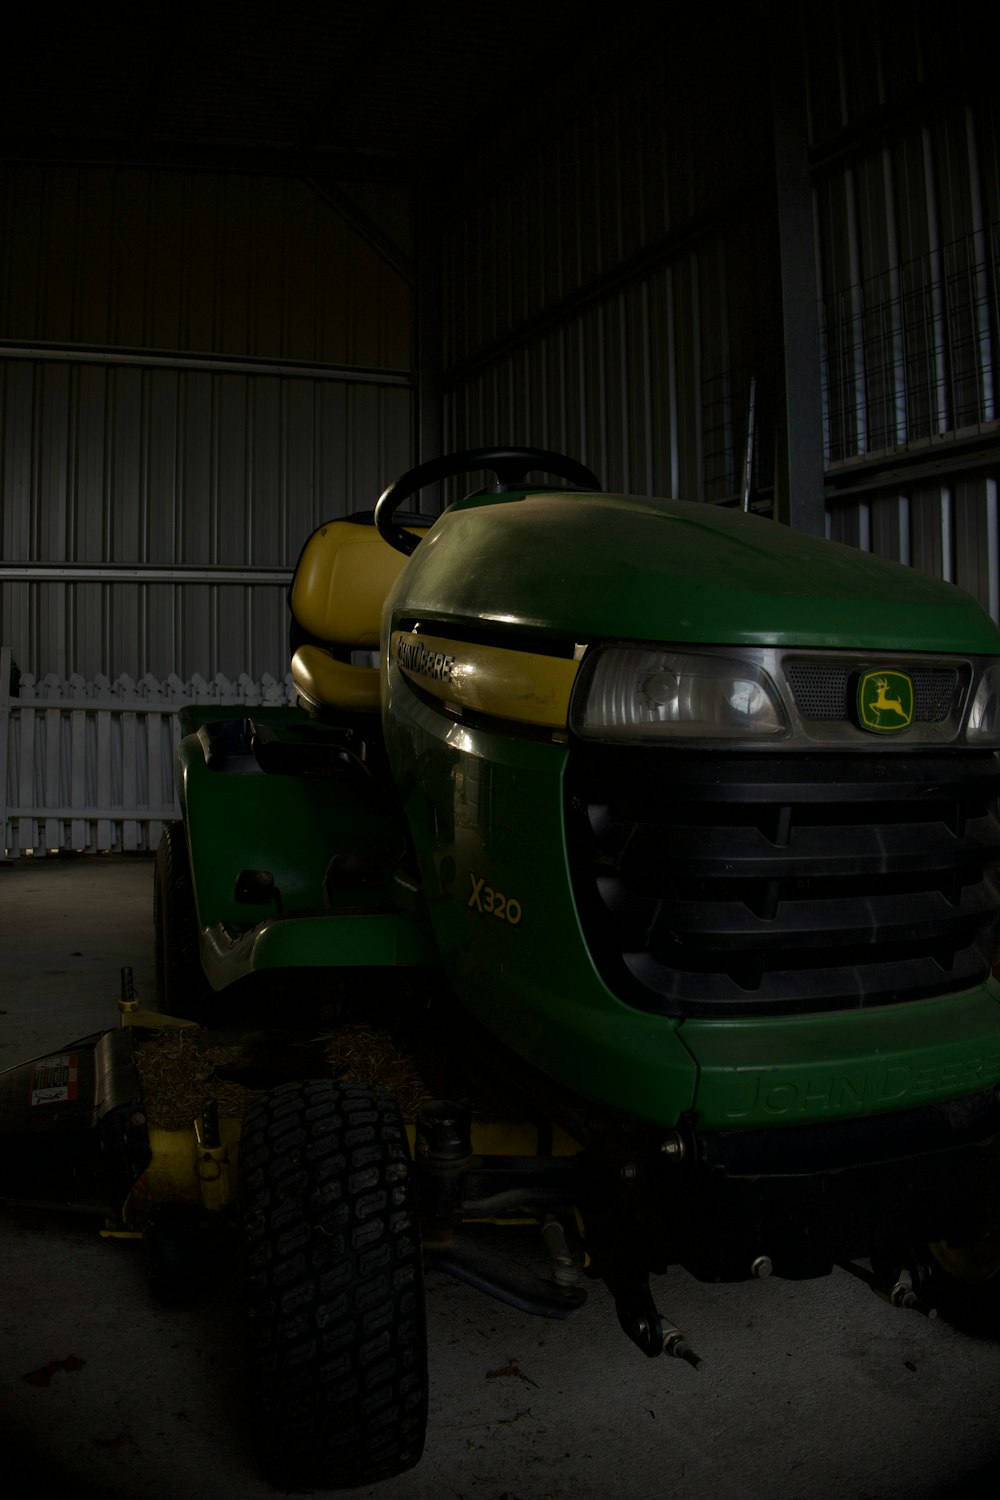 a green lawn mower parked in a garage